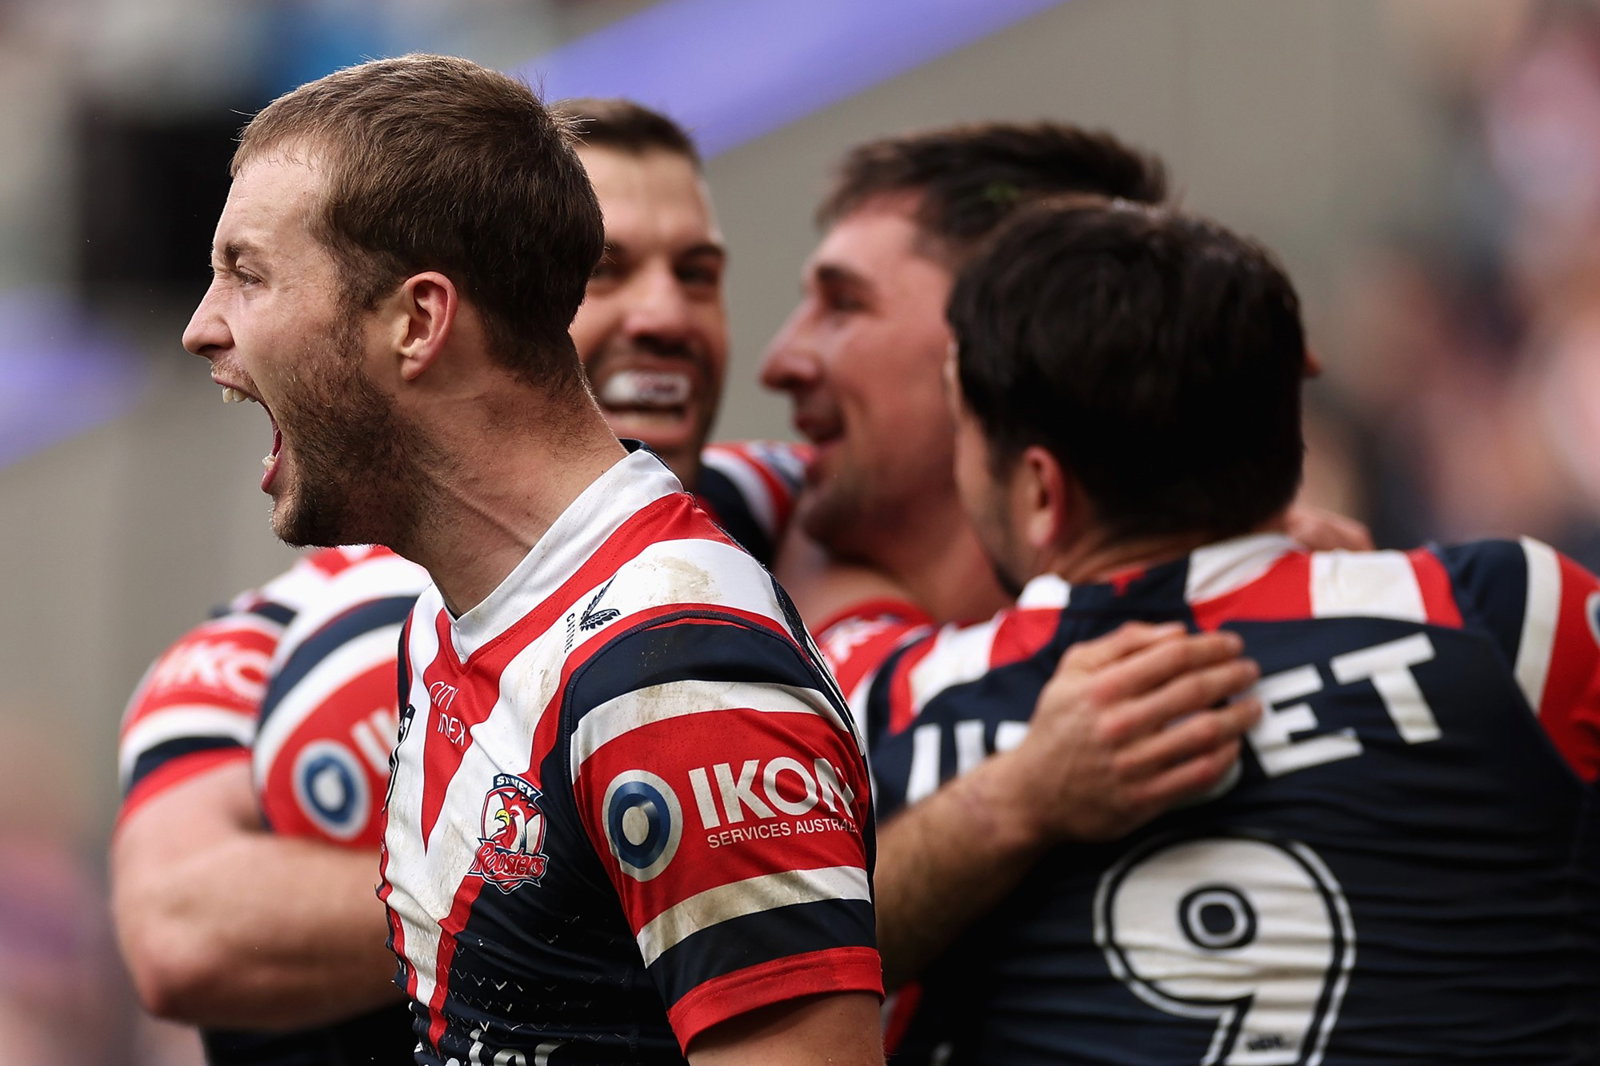 Sam Walker shouts as Sydney Roosters teammates celebrate a try in the background.